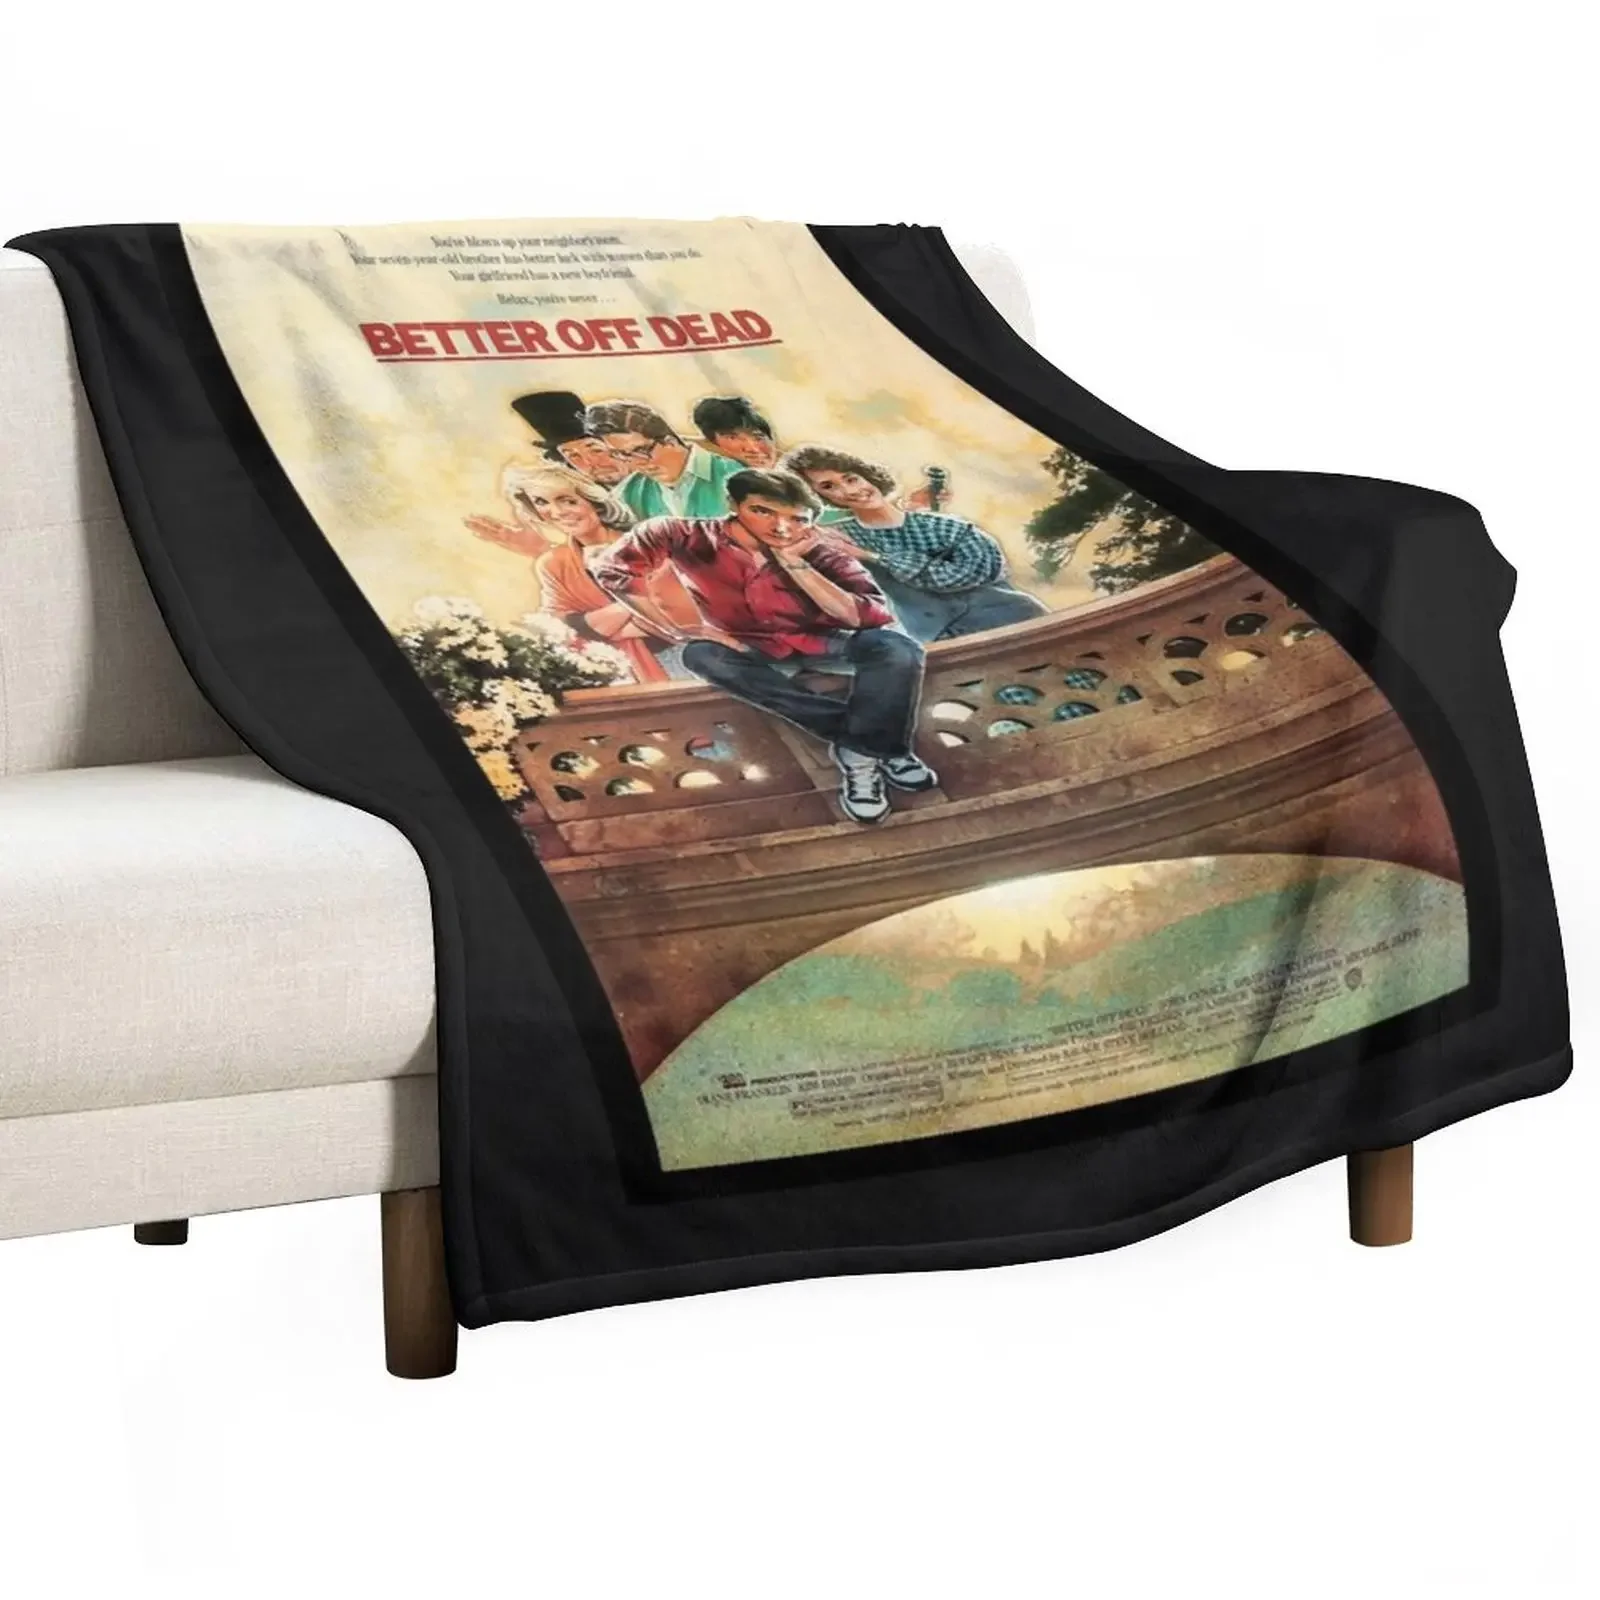 

BETTER OFF DEAD Classic T-Shirt Throw Blanket Comforter Soft Beds Flannel Fabric Blankets